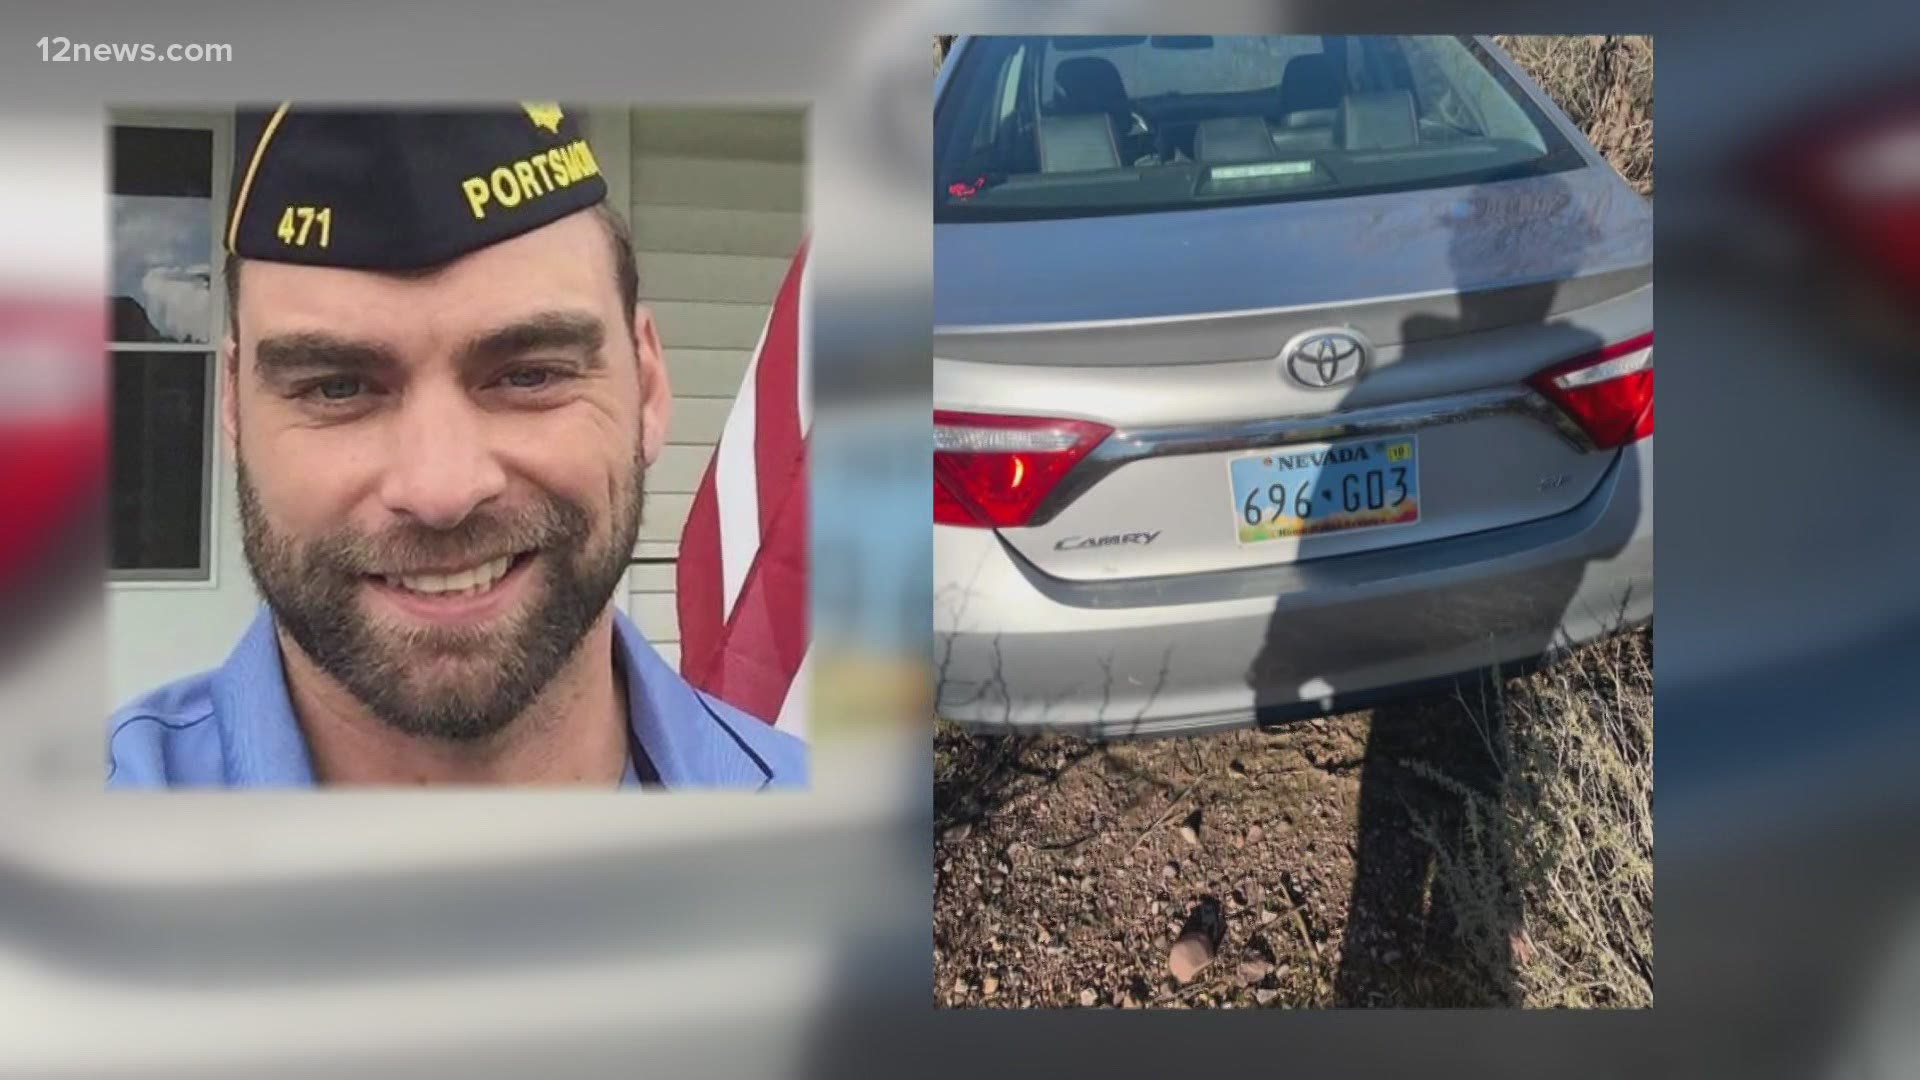 A Green Alert is a public service announcement for when an at-risk veteran goes missing. A few states use this alert but there is a push for it to be used nationwide